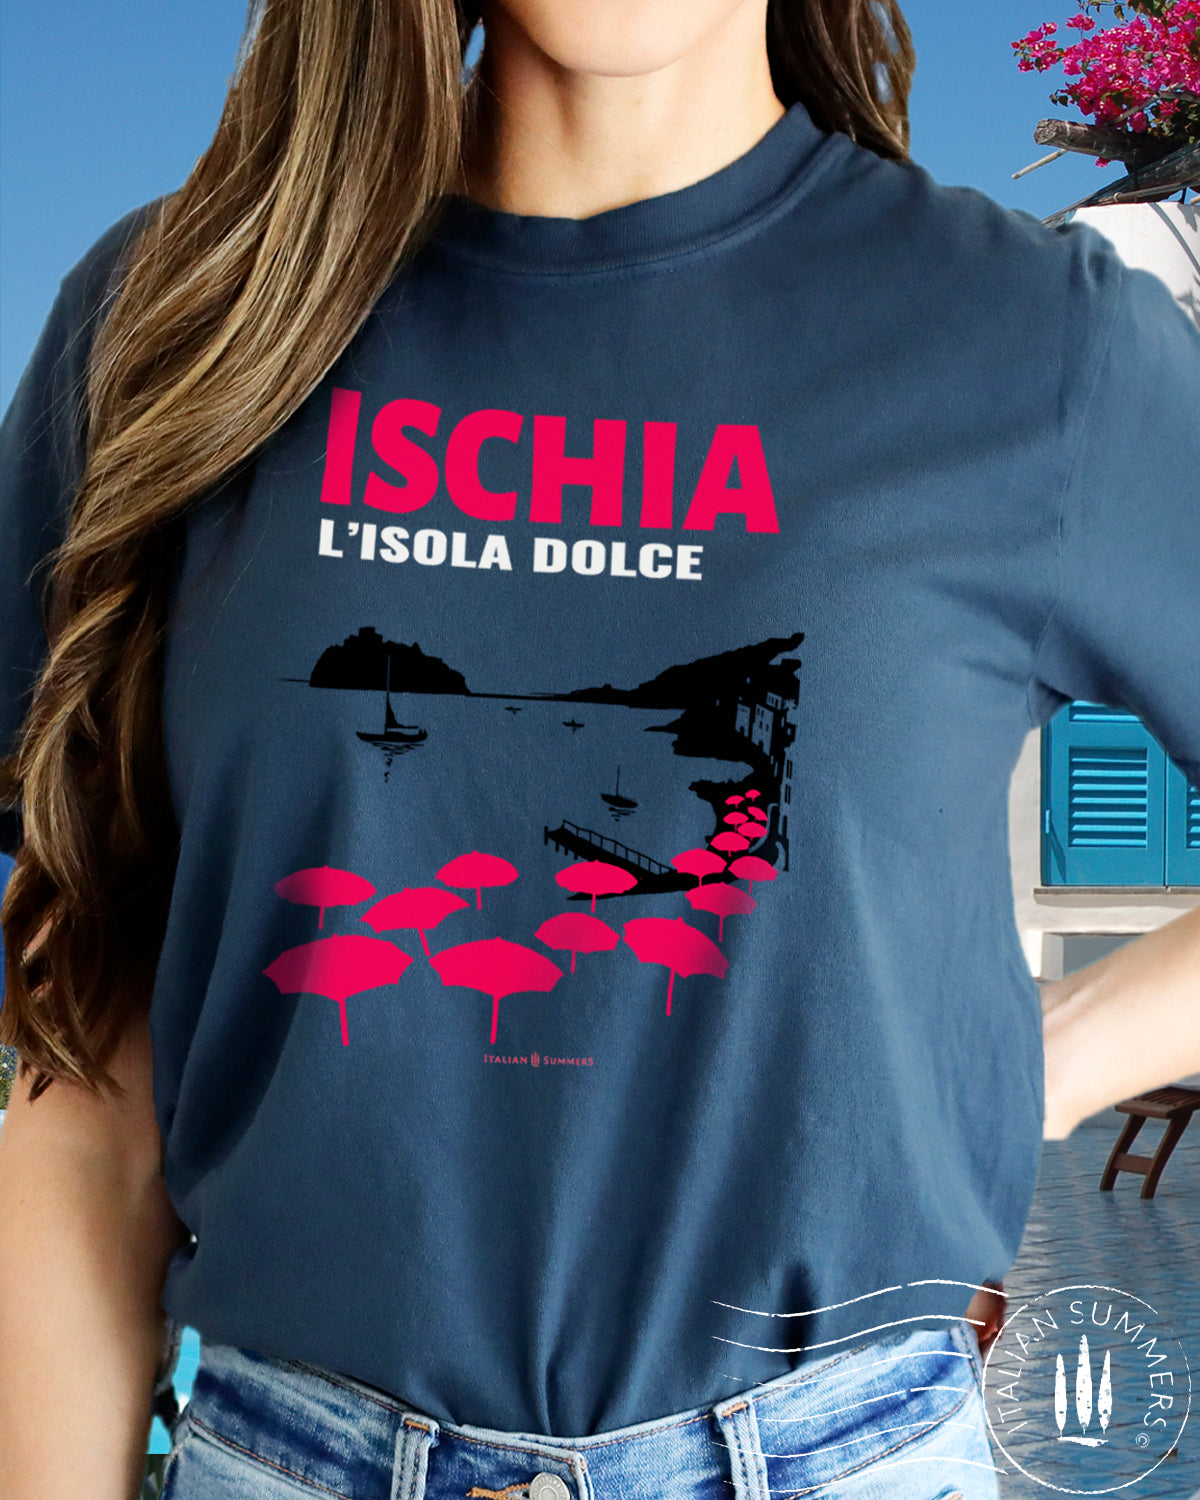 T-shirt ISCHIA L' Isola Dolce - by Italian Summers